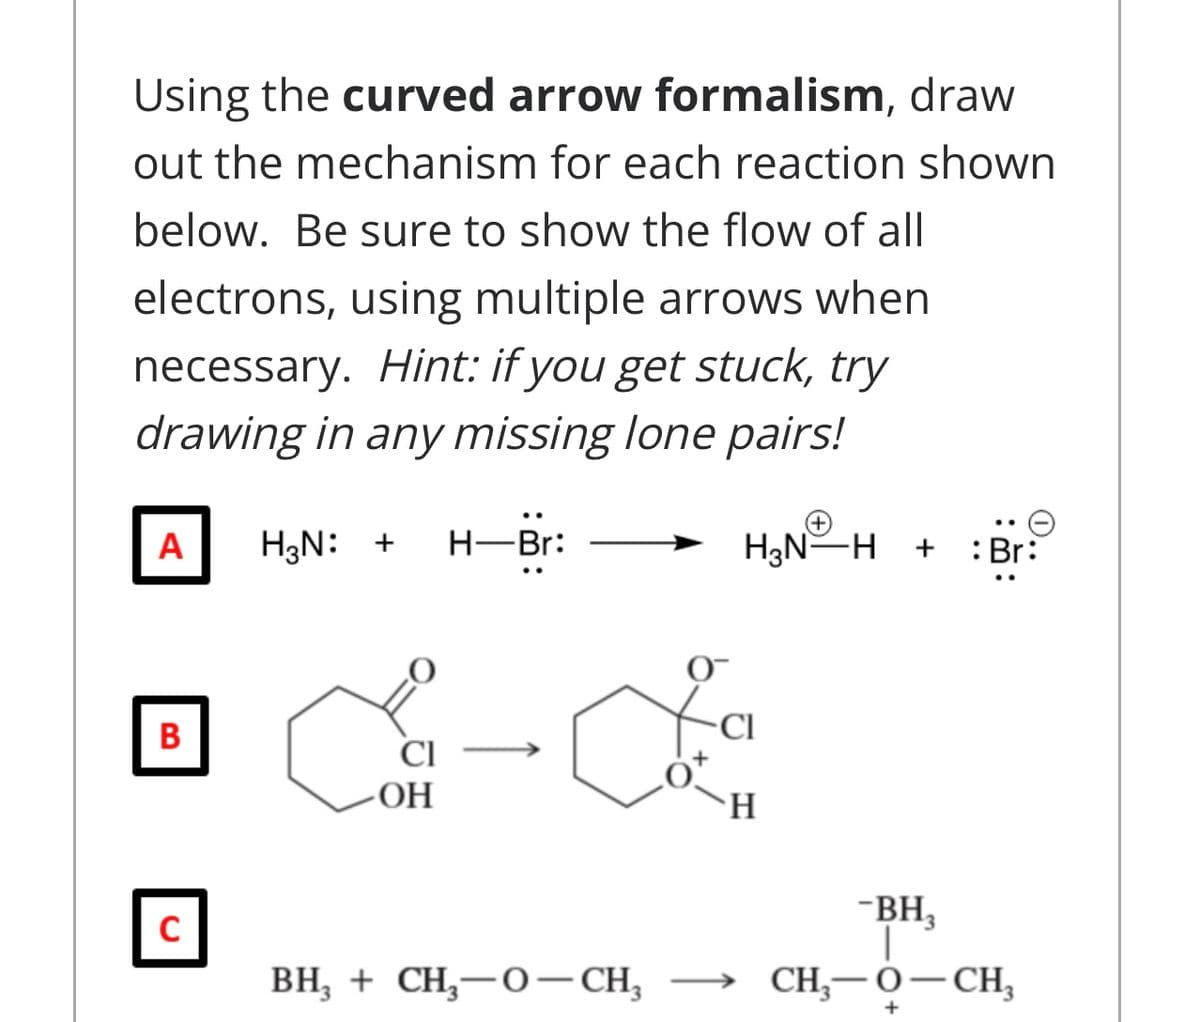 Using the curved arrow formalism, draw
out the mechanism for each reaction shown
below. Be sure to show the flow of all
electrons, using multiple arrows when
necessary. Hint: if you get stuck, try
drawing in any missing lone pairs!
A
H3N: +
H-Br:
H3N-H + :Br:
B
CI
CI
-OH
H.
-BH,
BH, + CH,-0-CH,
CH,—О — Сн,
